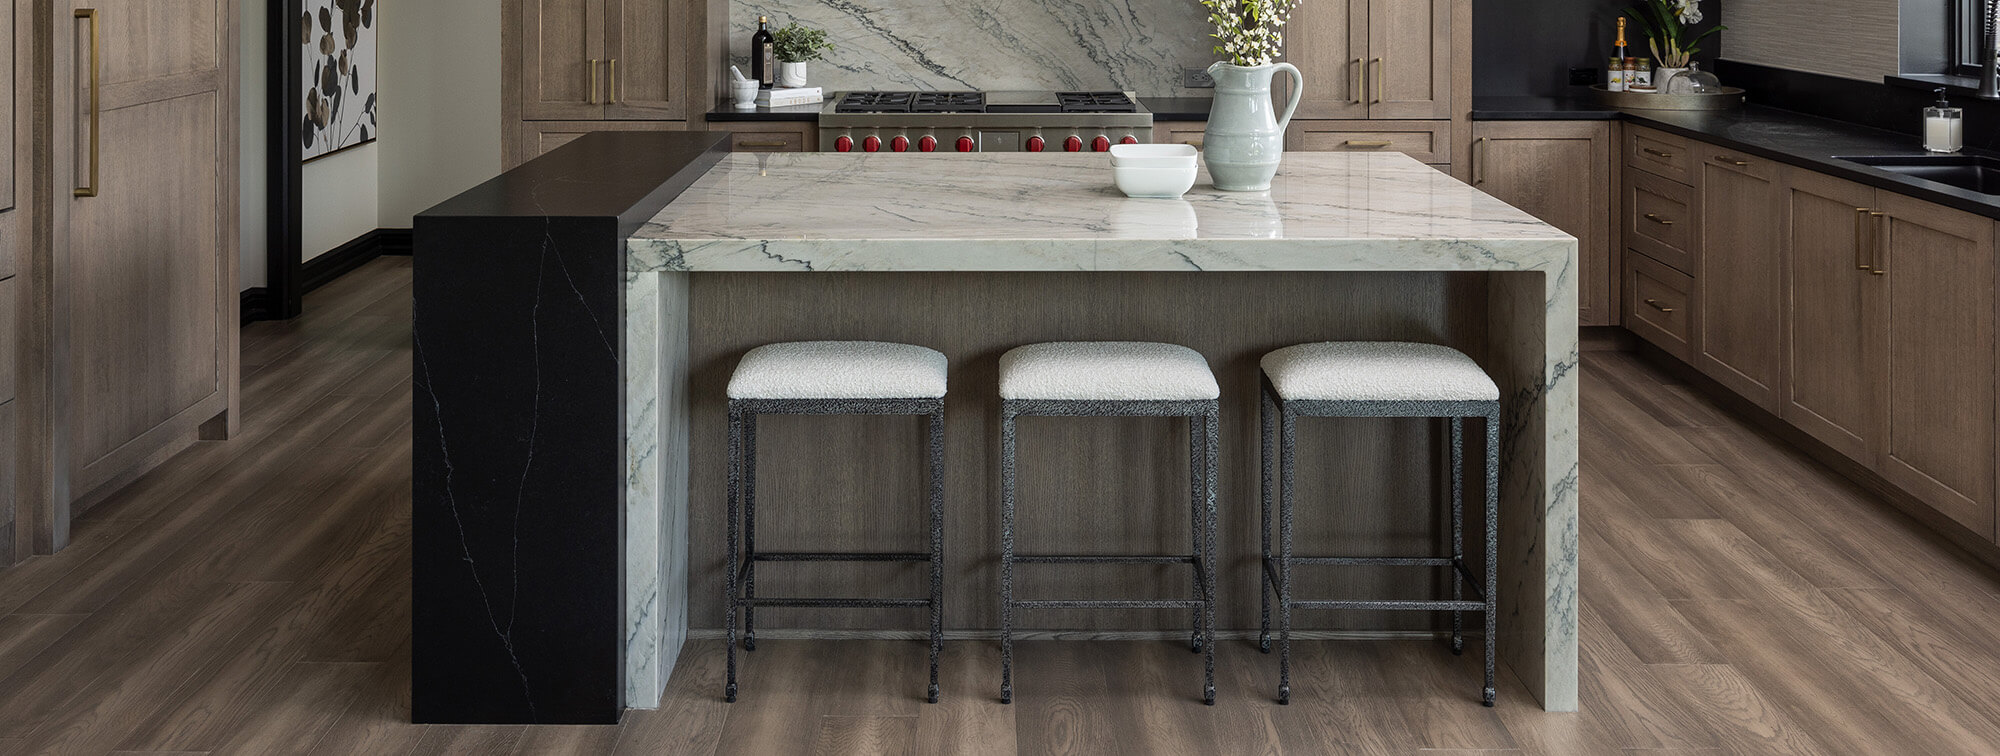 A stunning kitchen island with 4 waterfall countertops and seating for three.